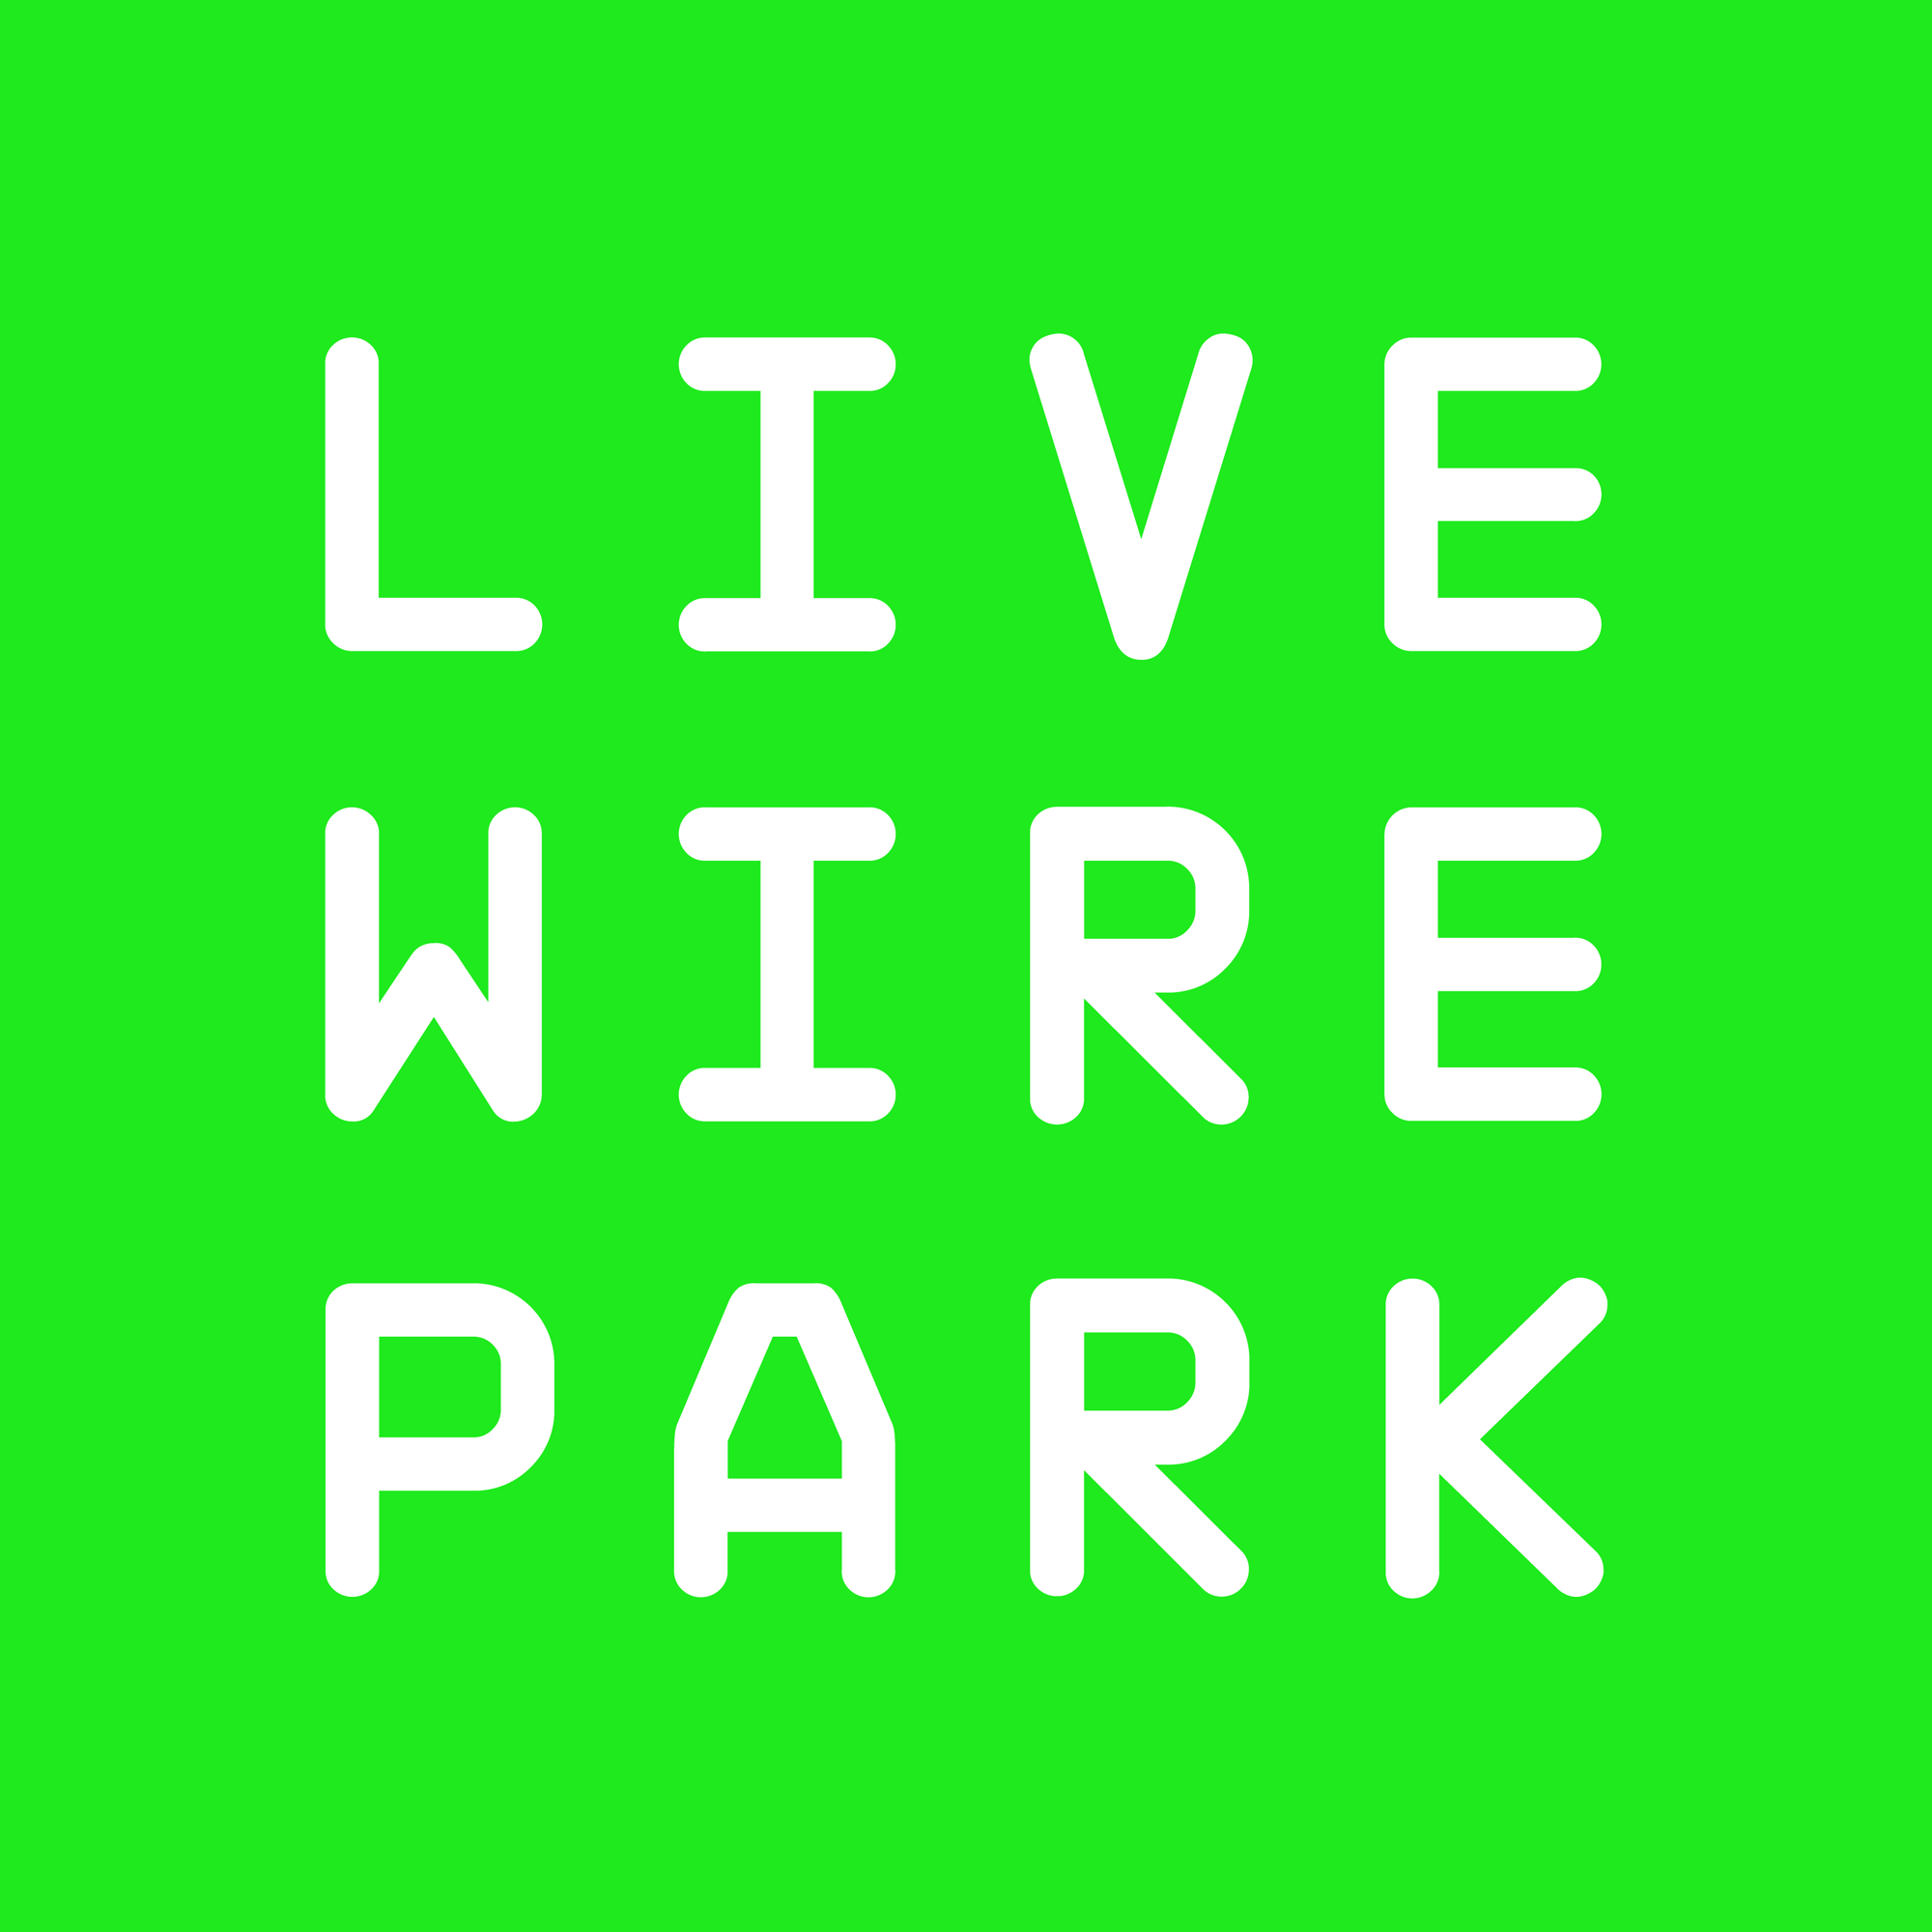 New Logo and Identity for Live Wire Park by Self-titled